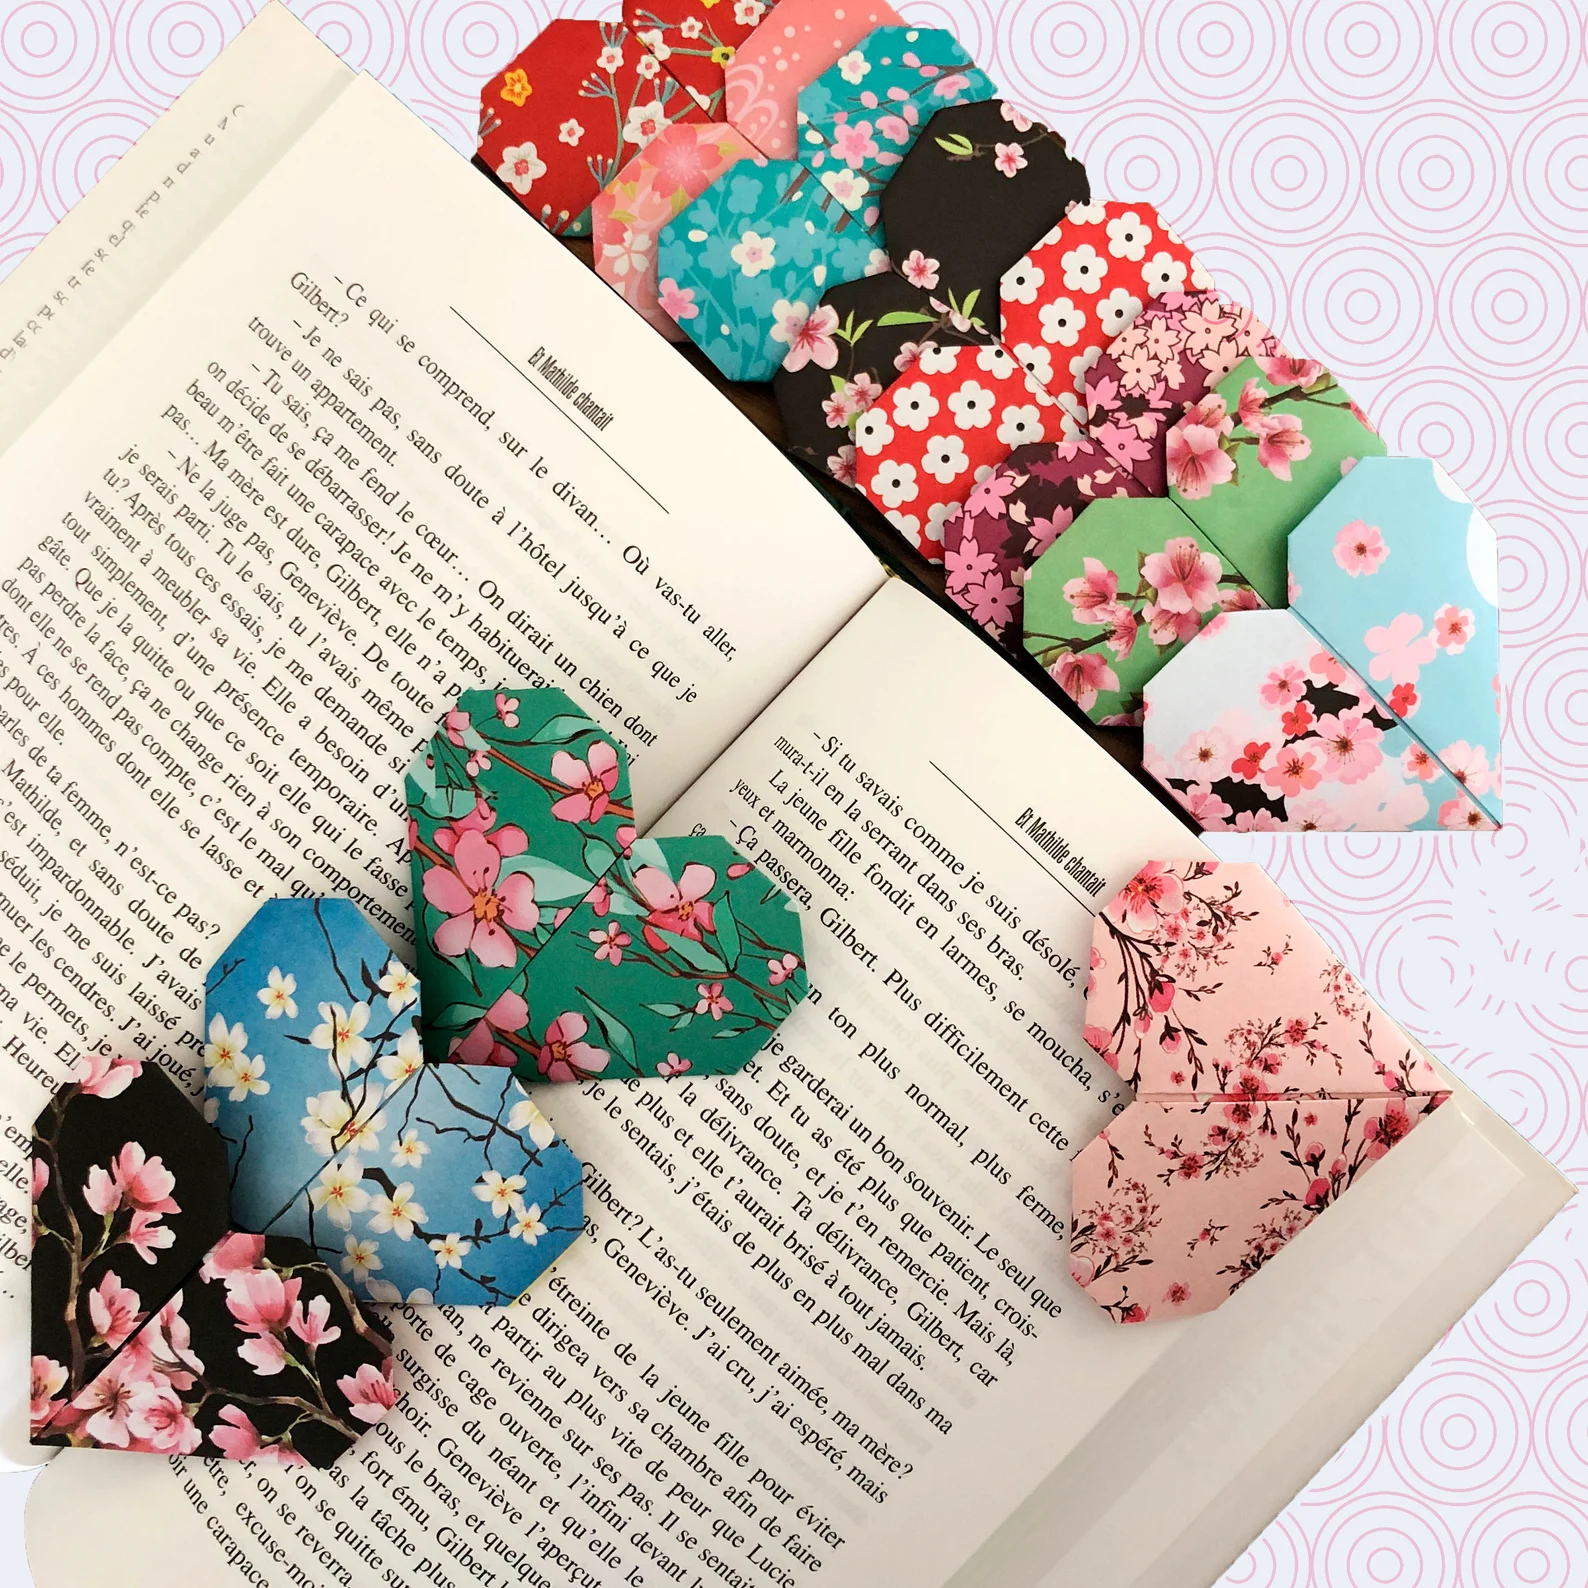 Heart shaped corner bookmarks in a variety of floral patterns